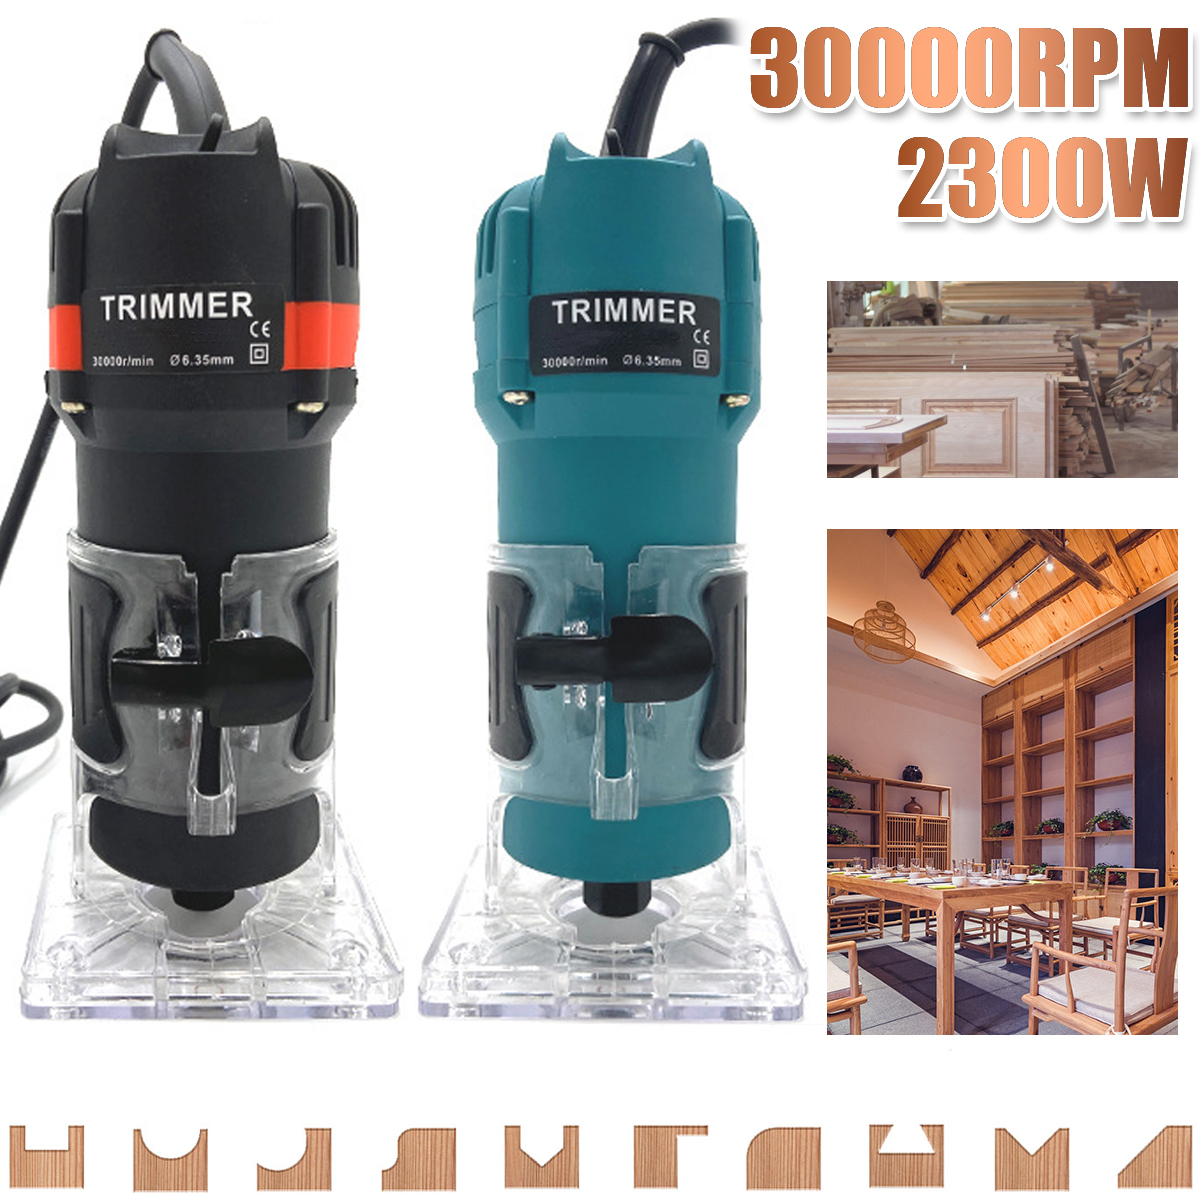 110V220V-30000RPM-Electric-Hand-Trimmer-Router-635mm-Wood-Laminator-Palm-Joiners-Working-Cutting-Too-1736422-2